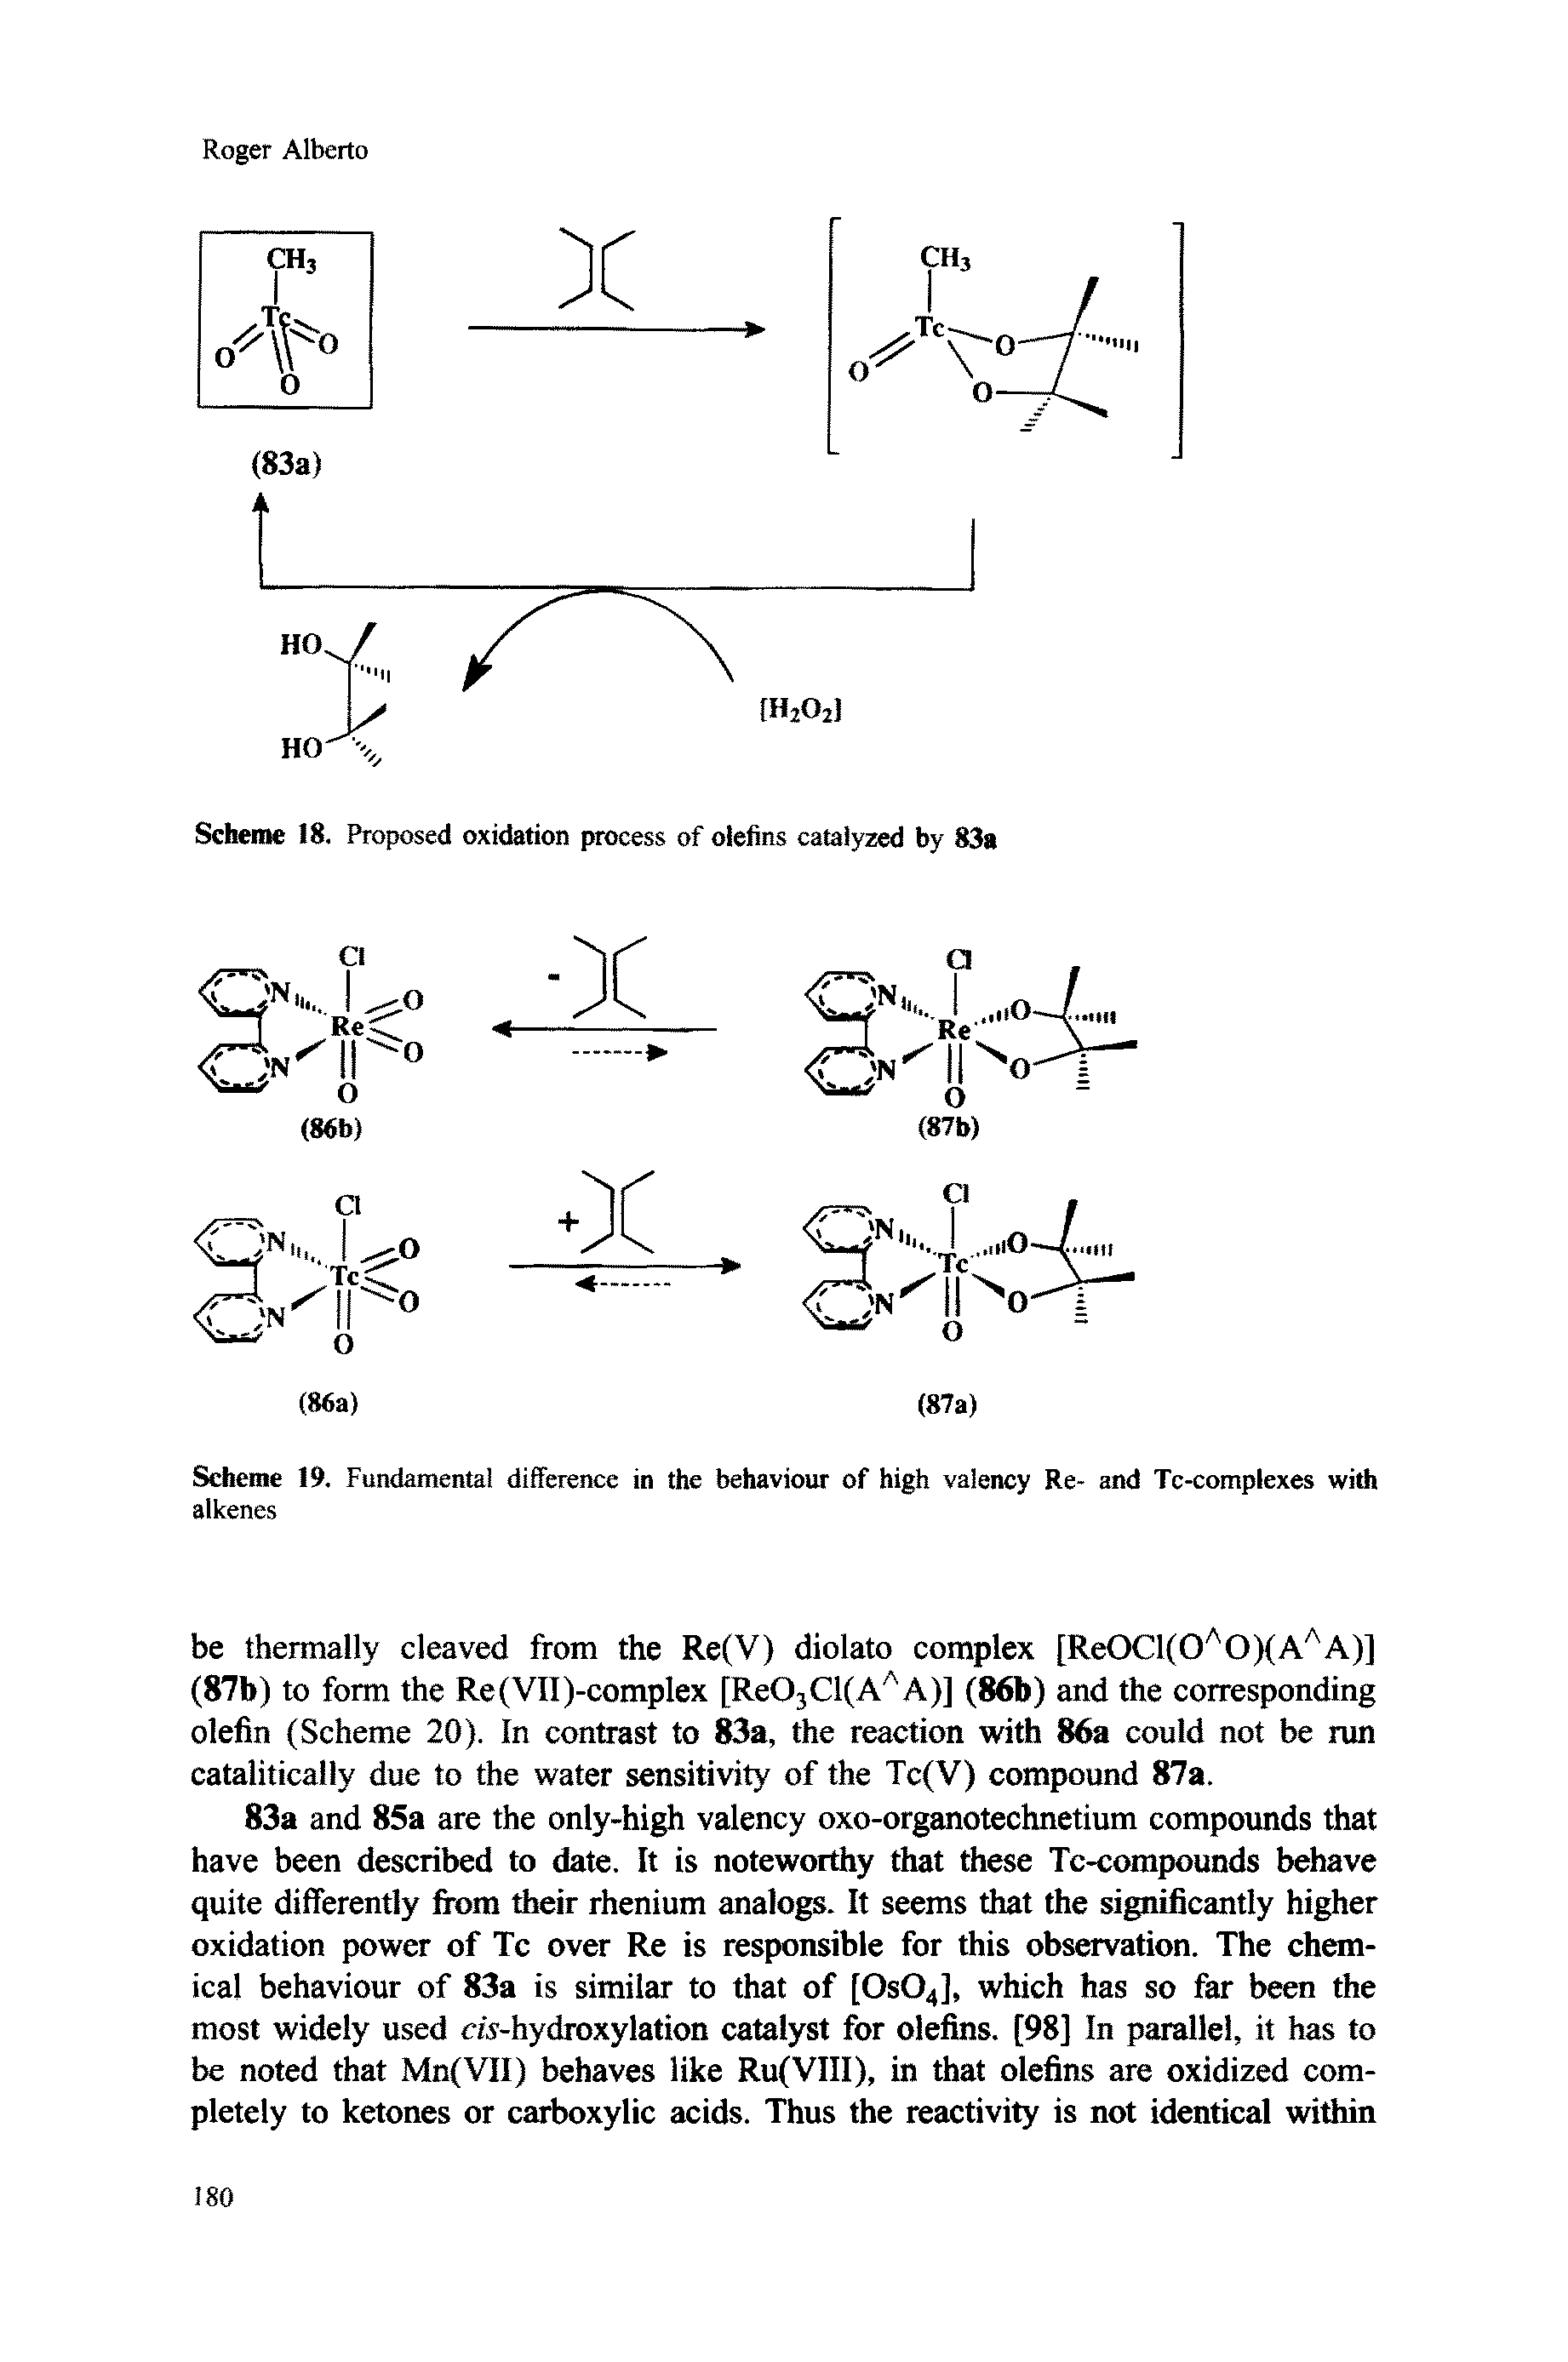 Scheme 18. Proposed oxidation process of olefins catalyzed by 83a...